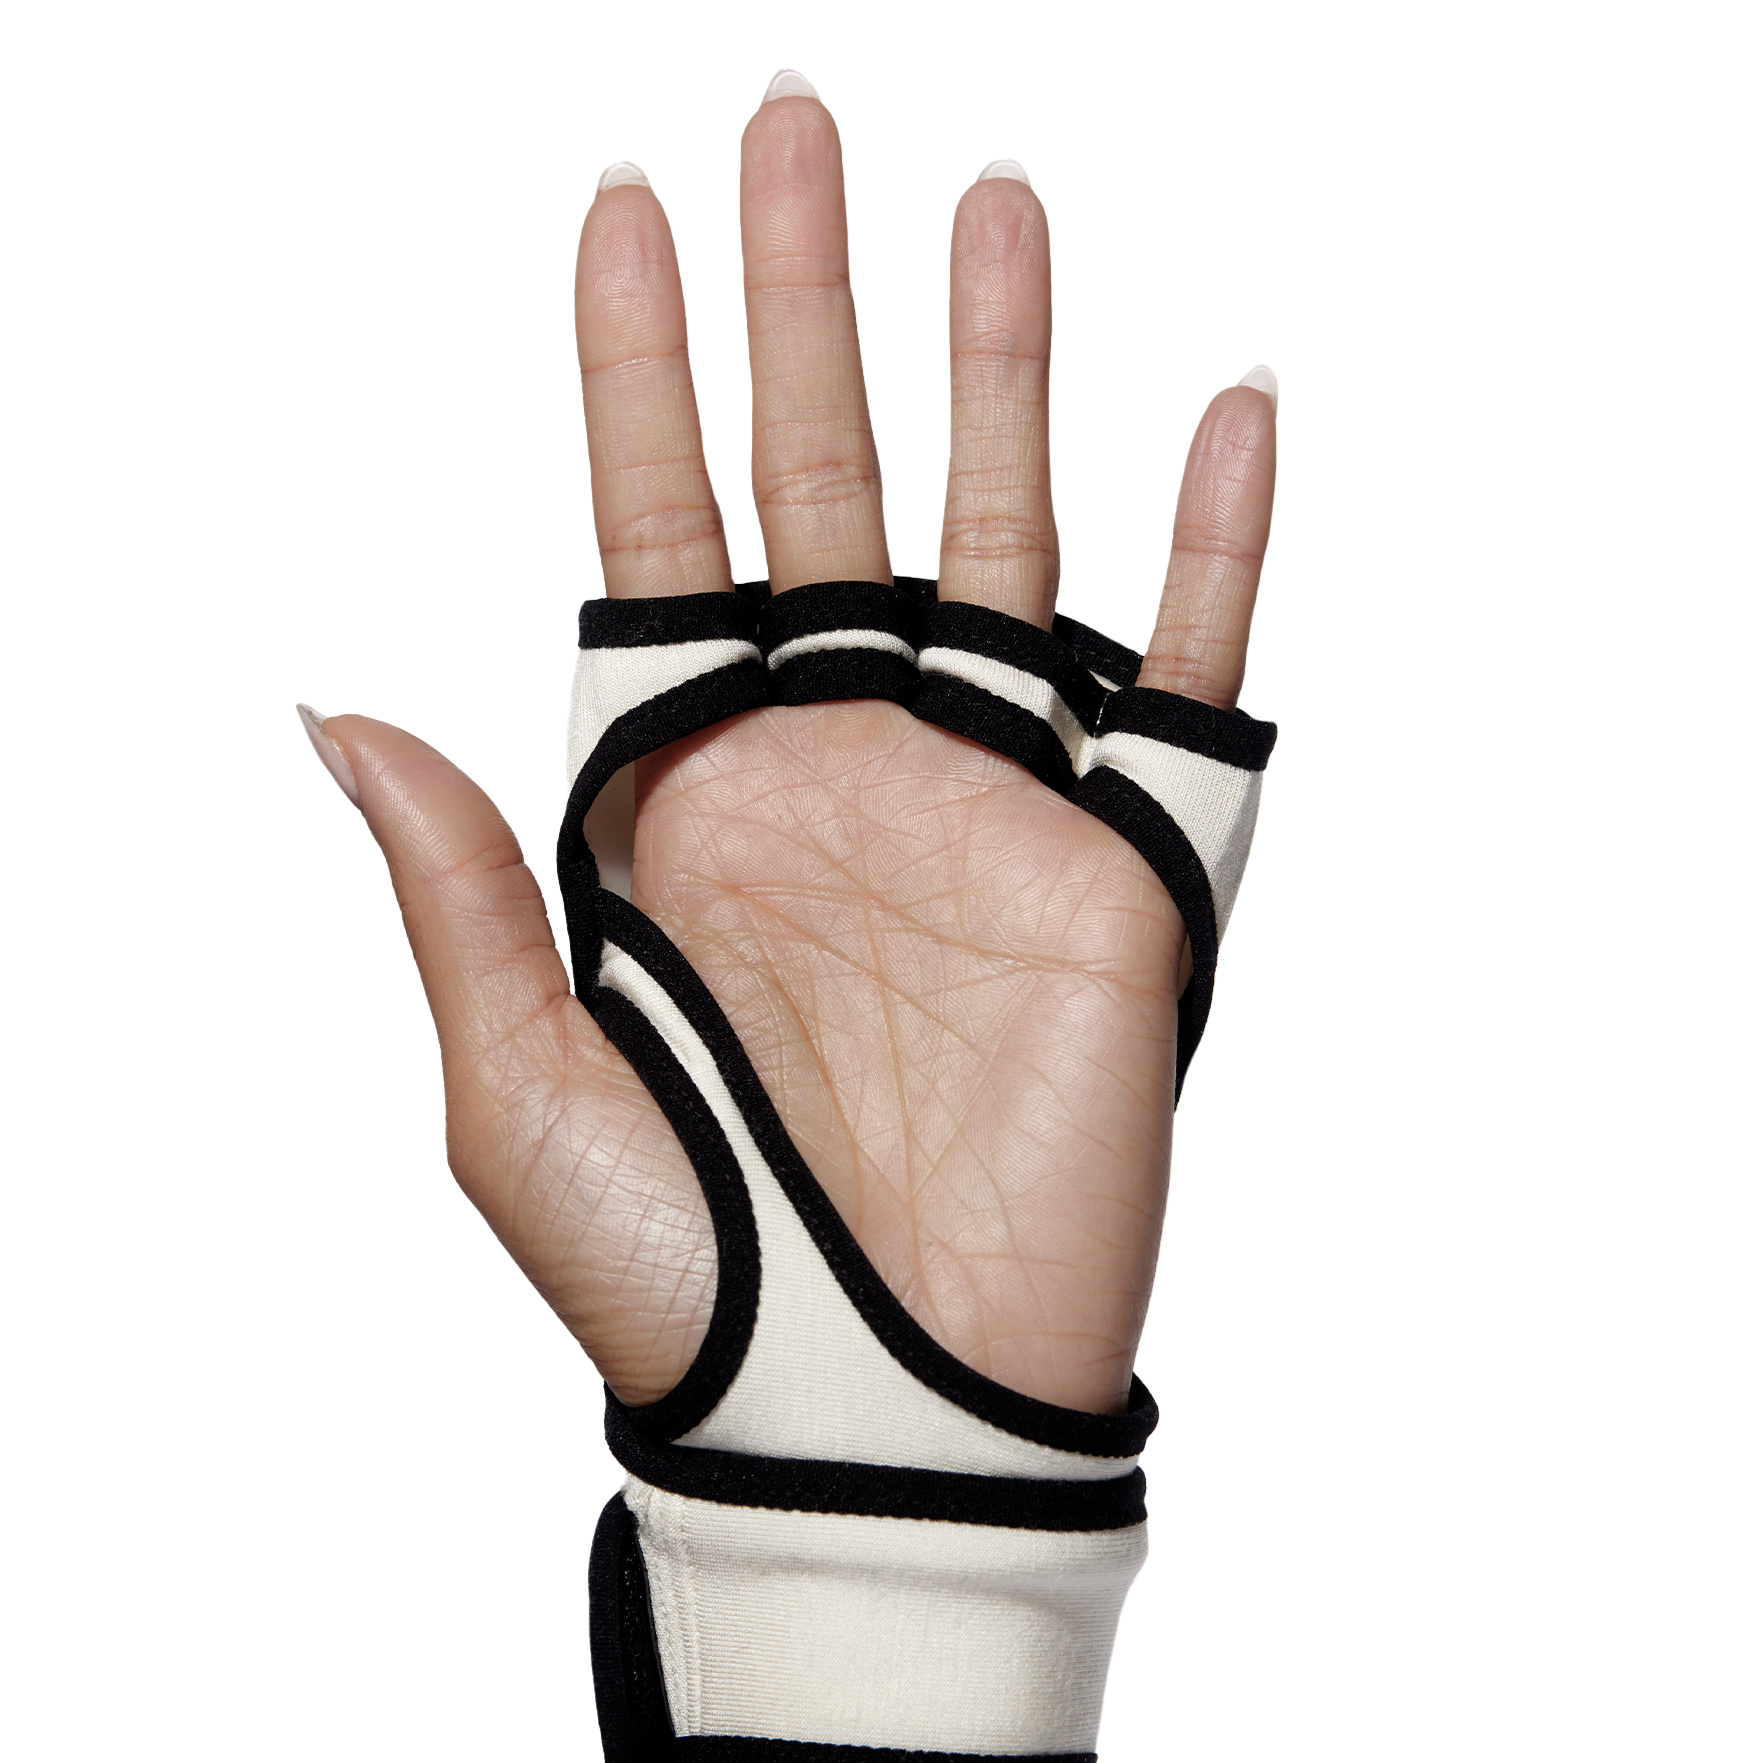 A hand wearing a Habelo Treatment-Boosting Glove, shown facing the palm of the hand